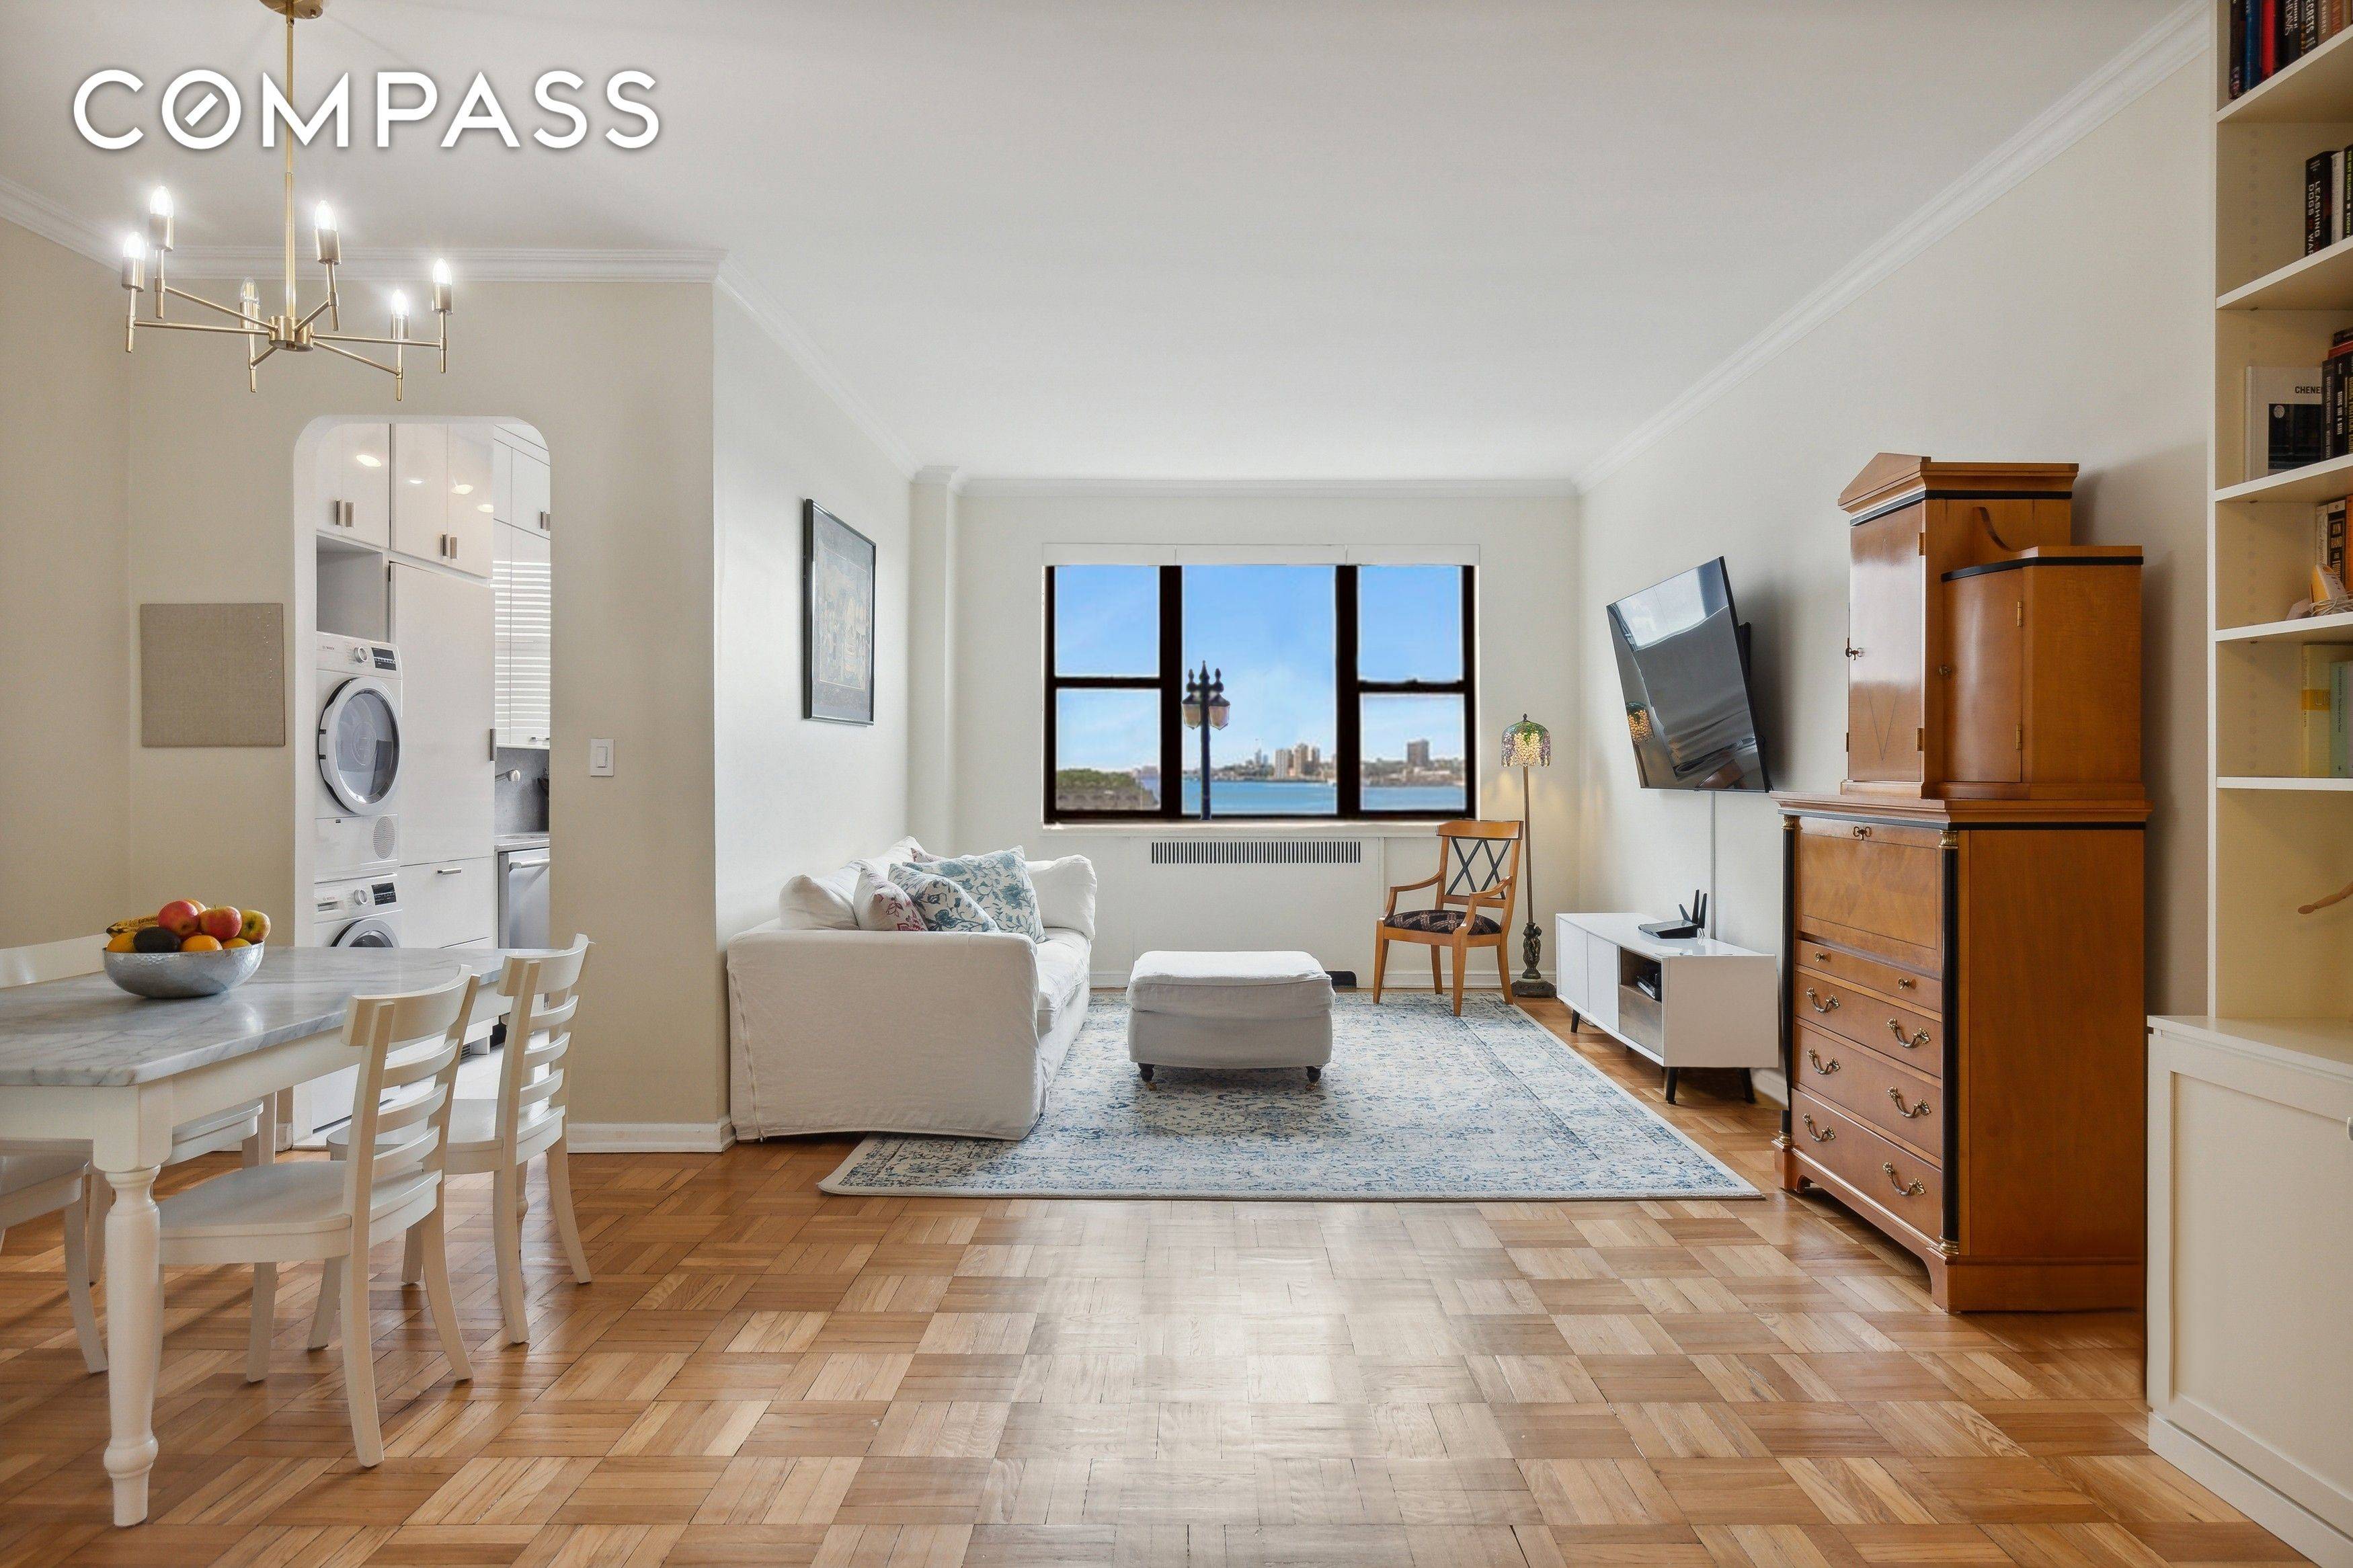 STUNNING 2 BEDROOM ON RIVERSIDE DRIVE This huge corner 2 Bedroom, 2 Bath home has glorious light from the south and west with views from the GWB to the Empire ...